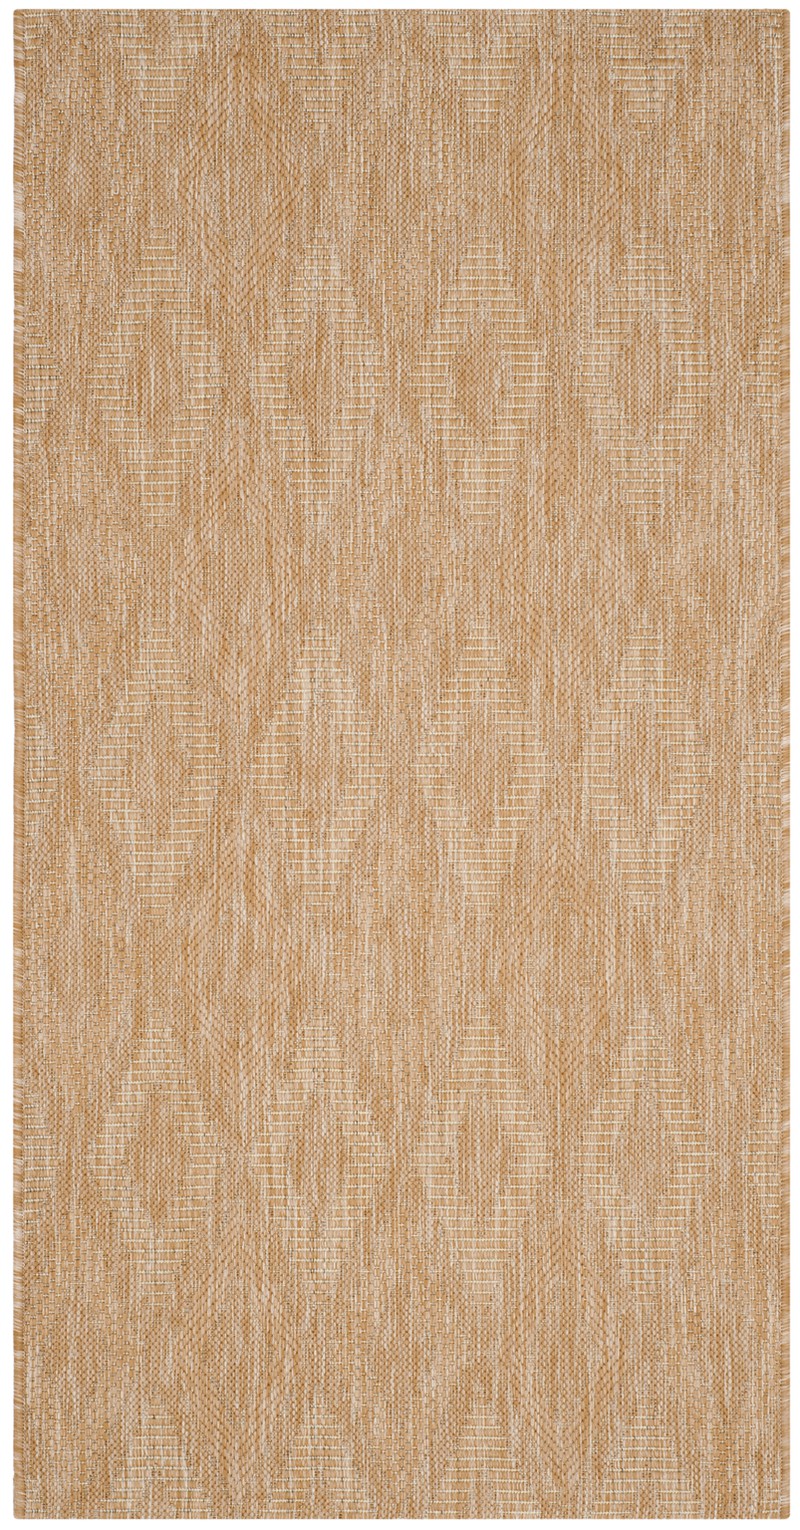 Safavieh Contemporary Indoor/Outdoor Woven Area Rug, Courtyard Collection, CY8522, in Natural & Natural, 122 X 170 cm - 